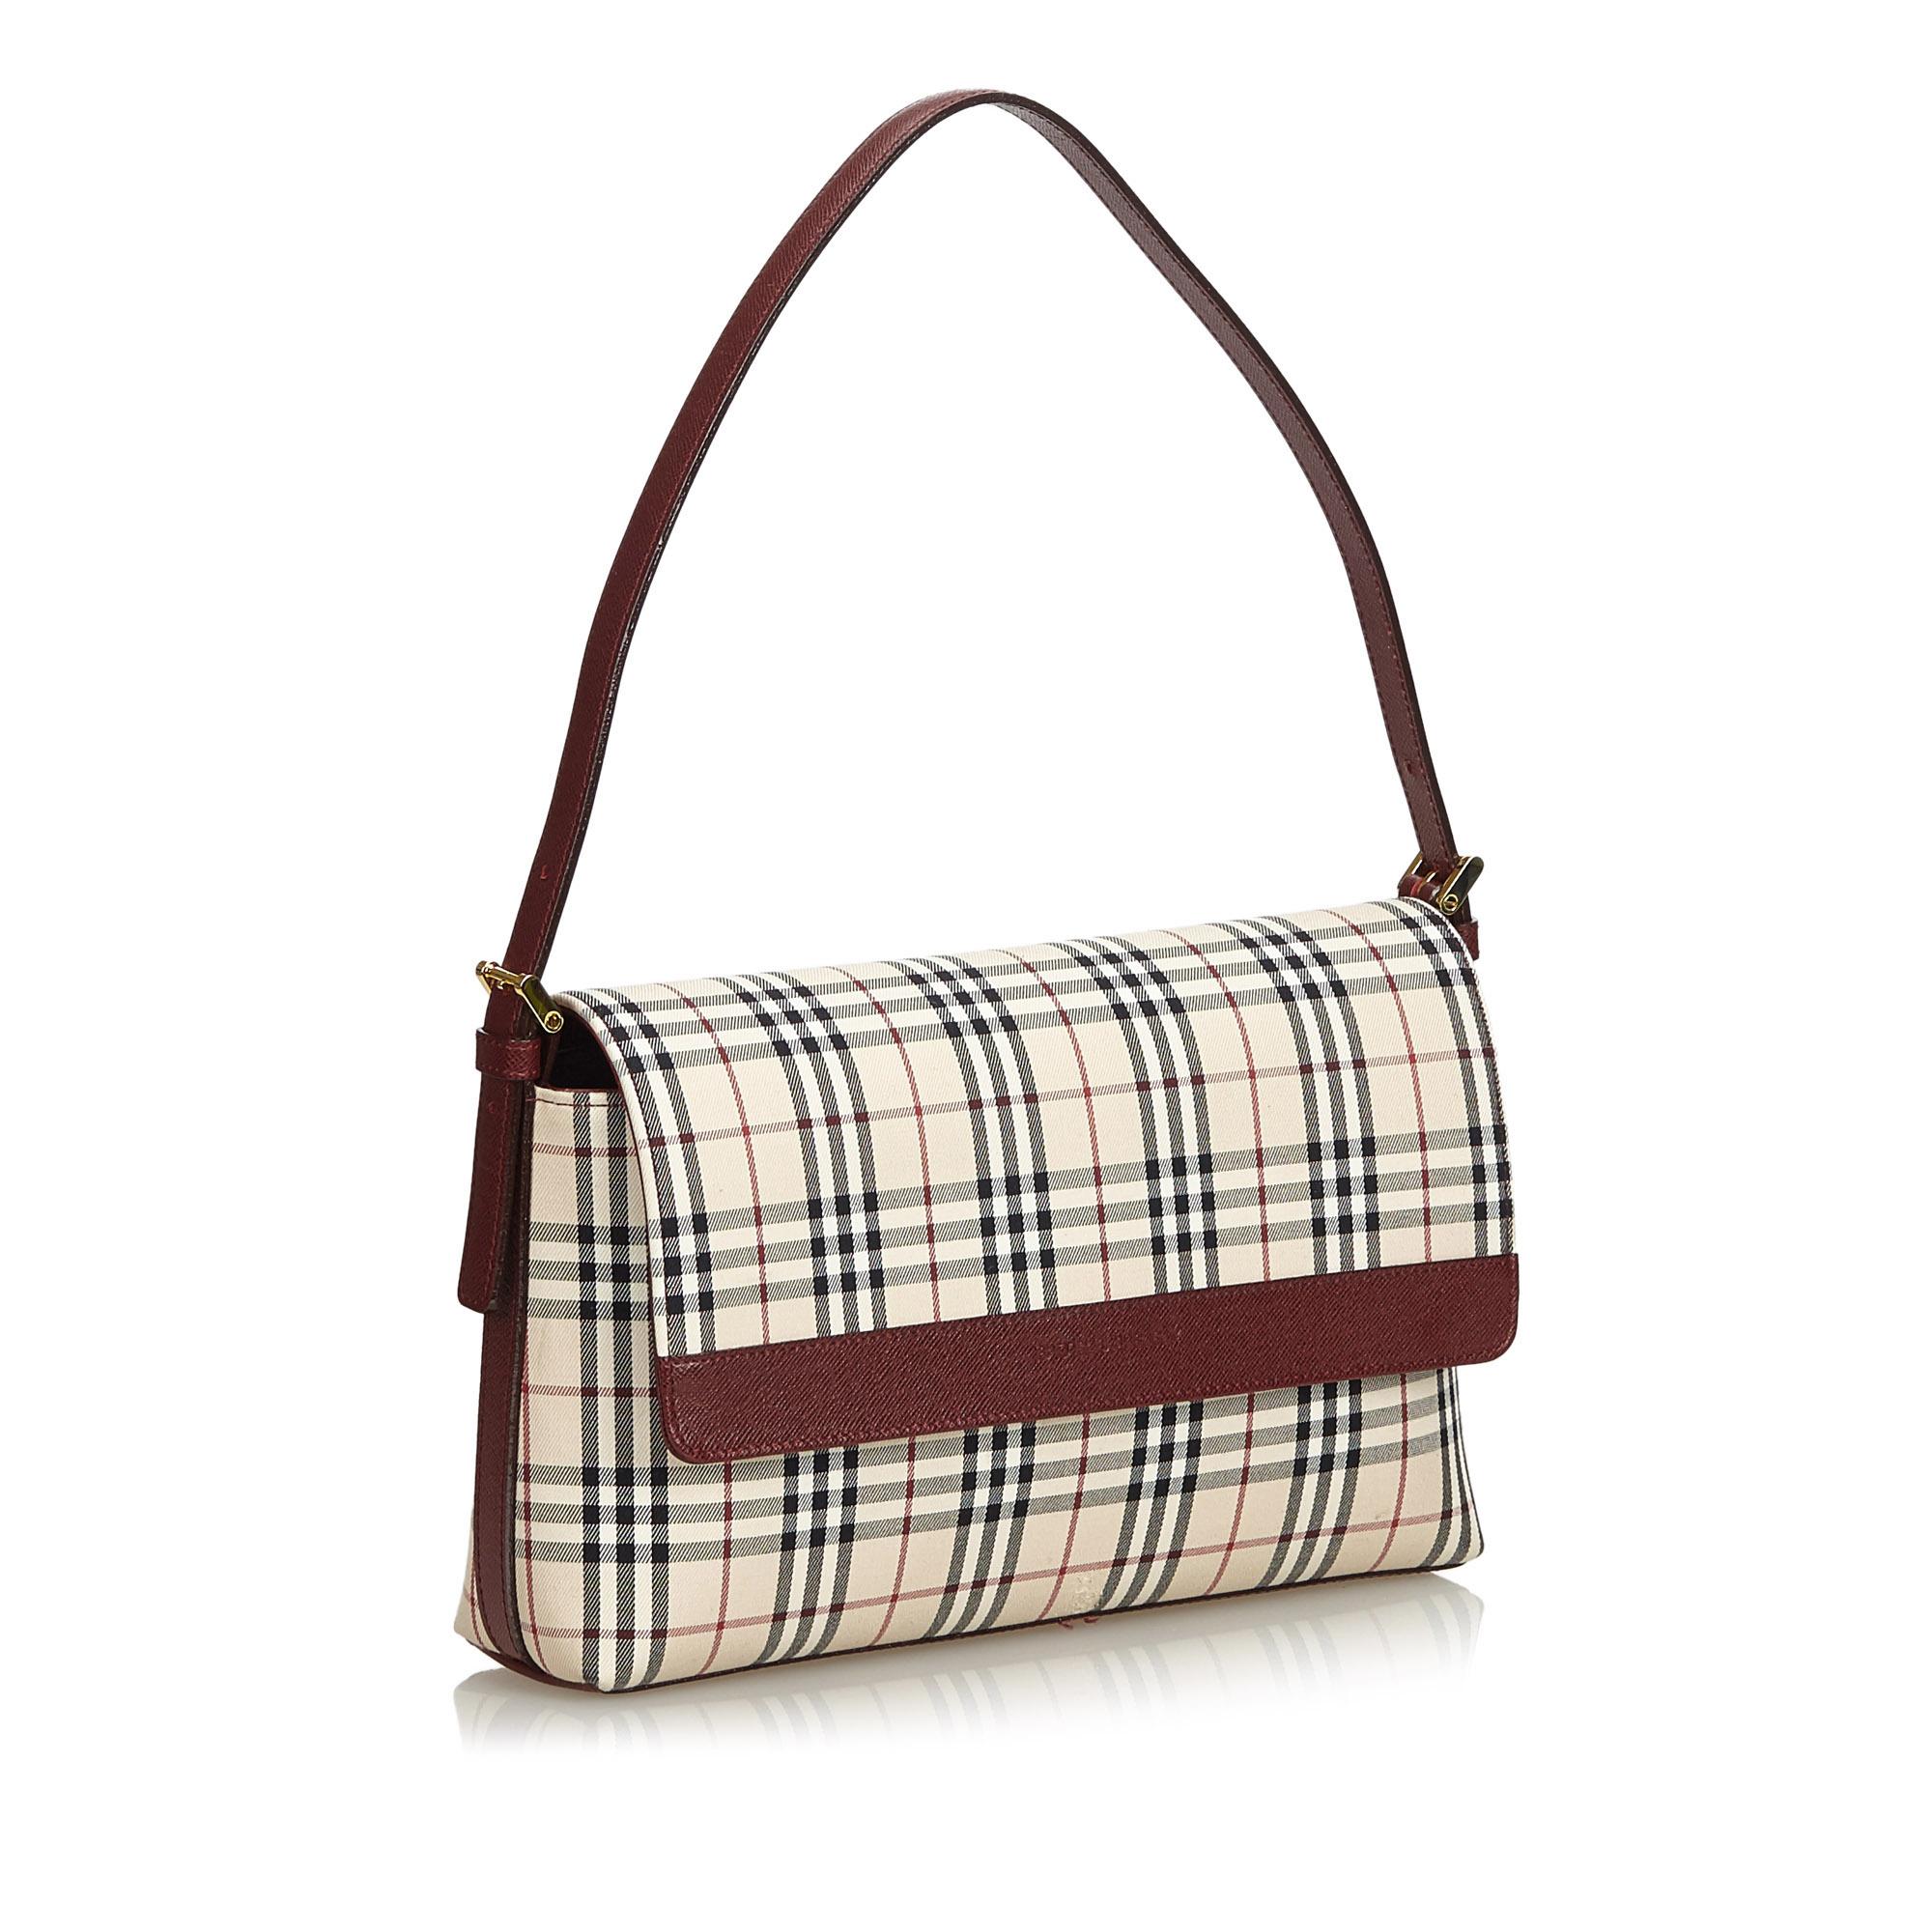 This shoulder bag features a cotton body with leather trim, a back exterior slip pocket, a flat leather strap, a top flap with a magnetic closure, an open top, and interior zip and slip pockets. It carries as AB condition rating.

Inclusions: 
Dust